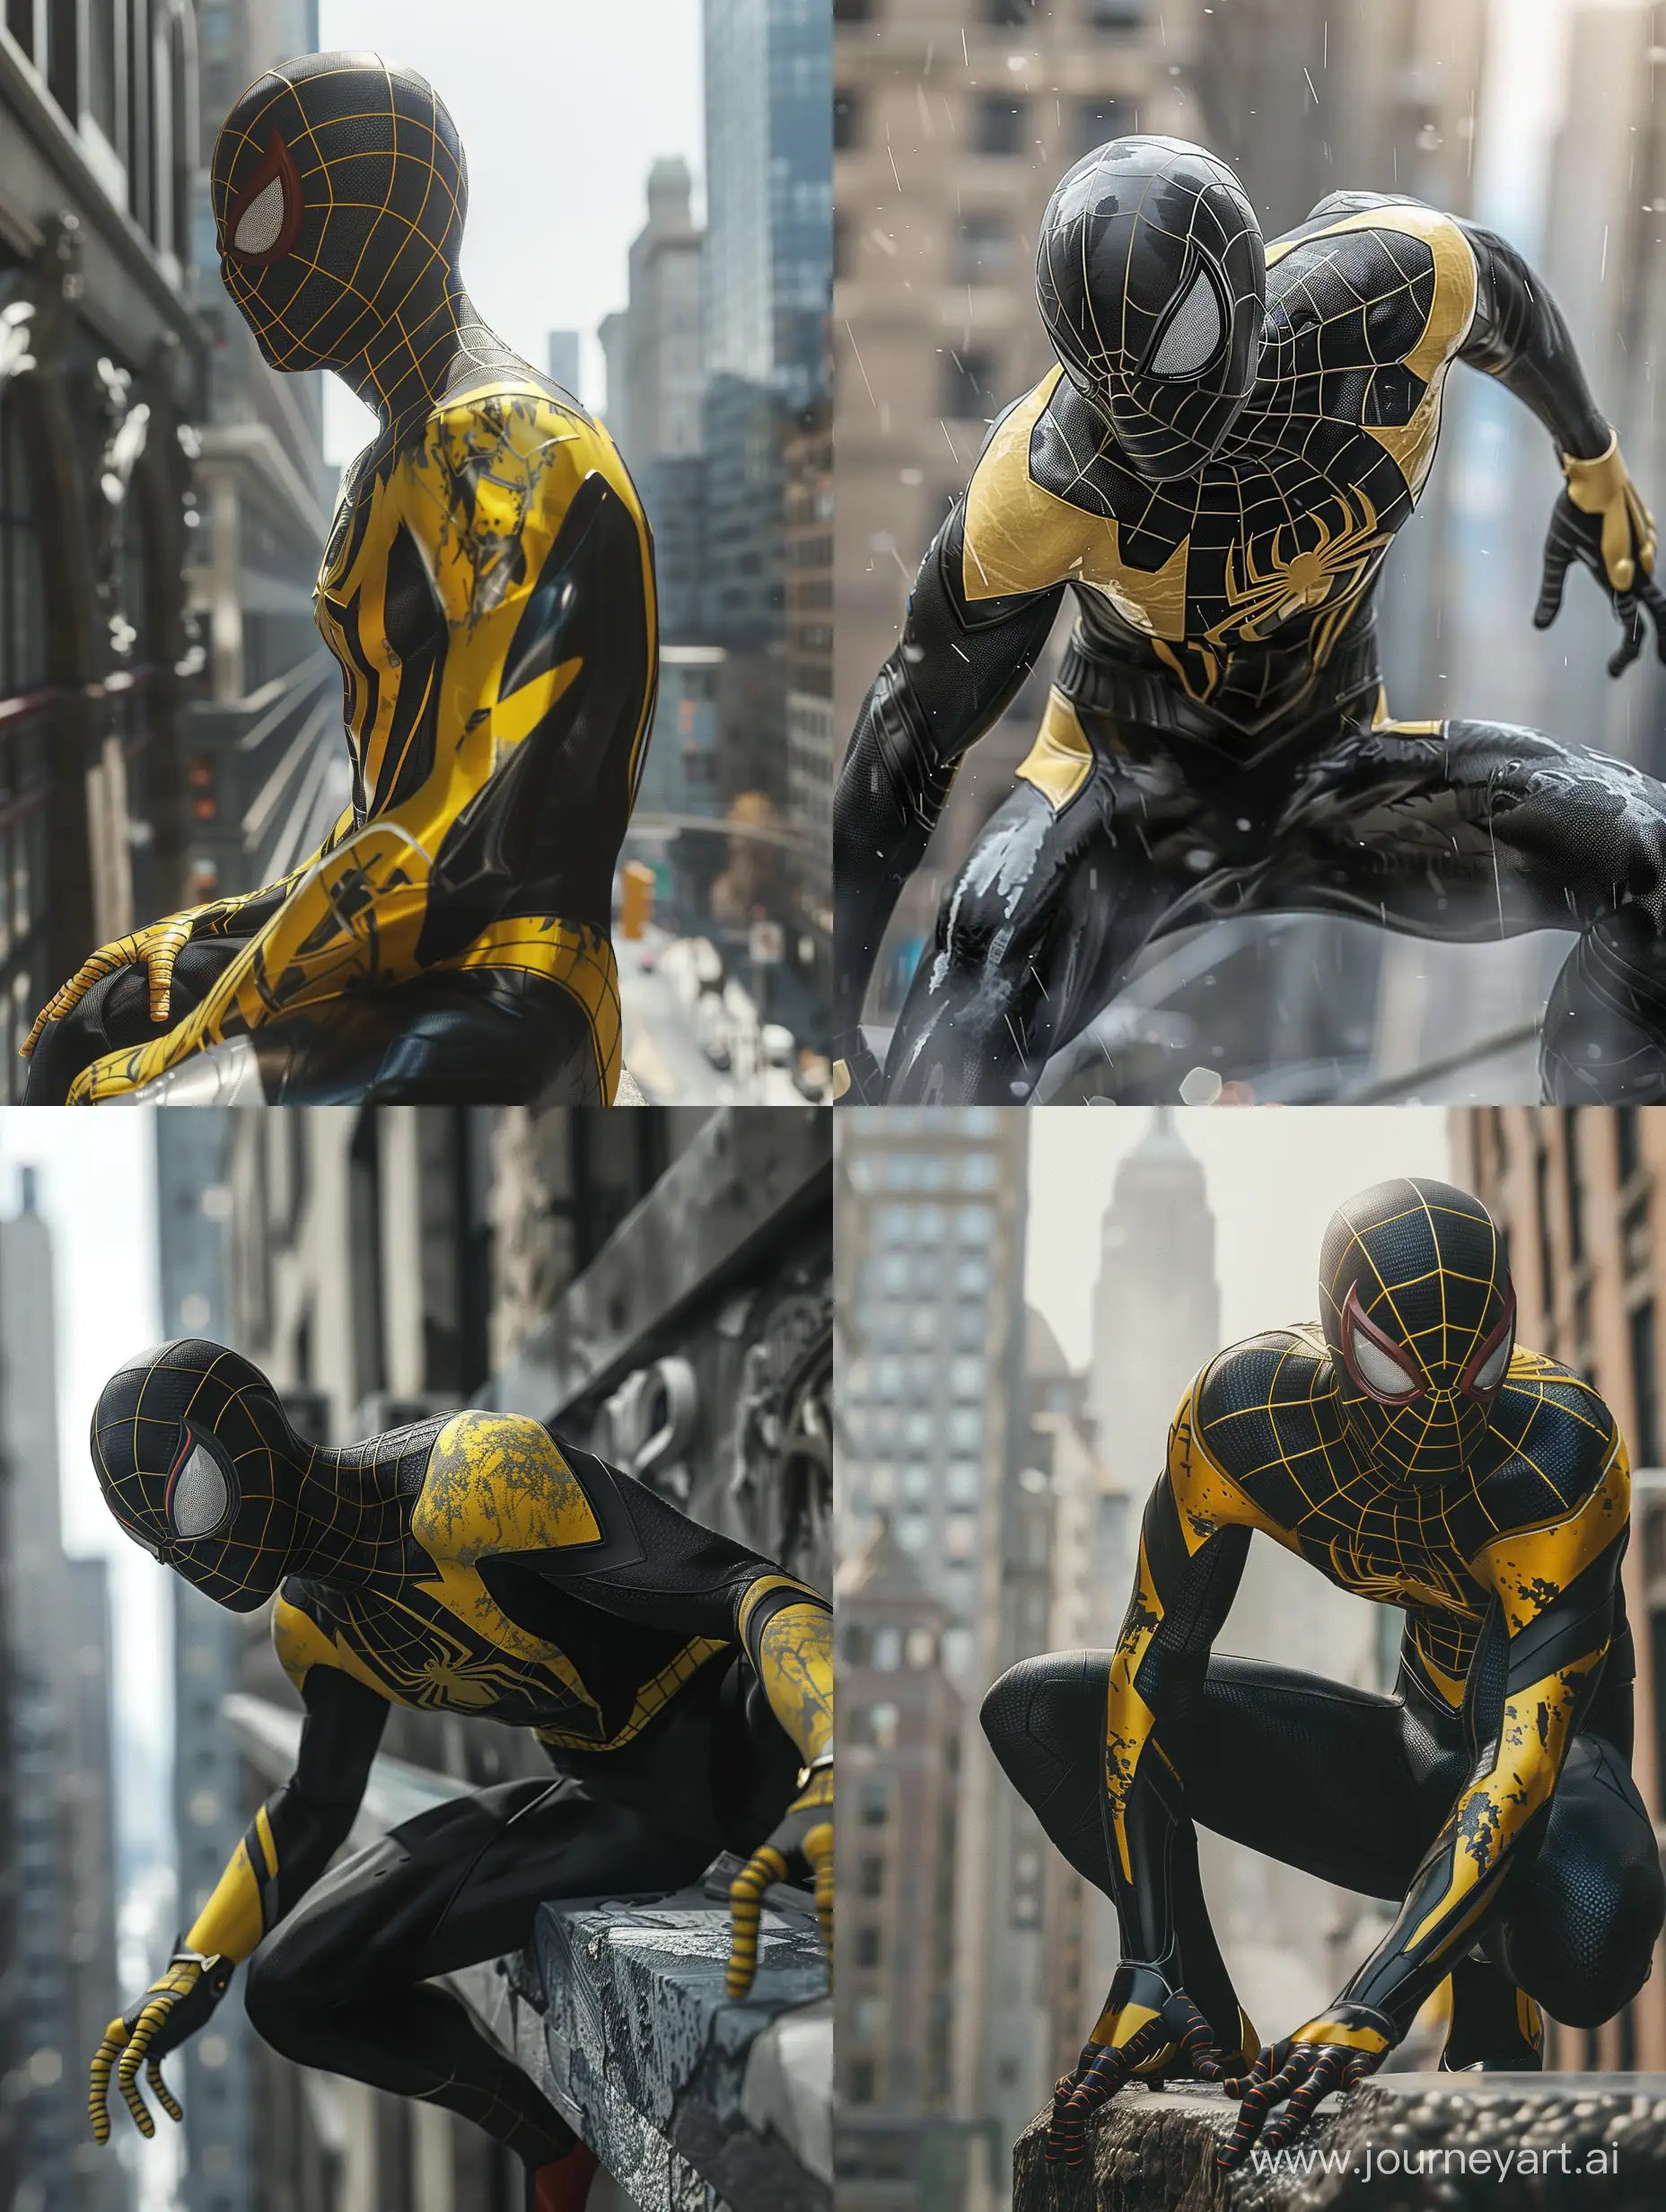 SpiderMan-Swinging-Through-Urban-Cityscape-in-UltraRealistic-Black-and-Yellow